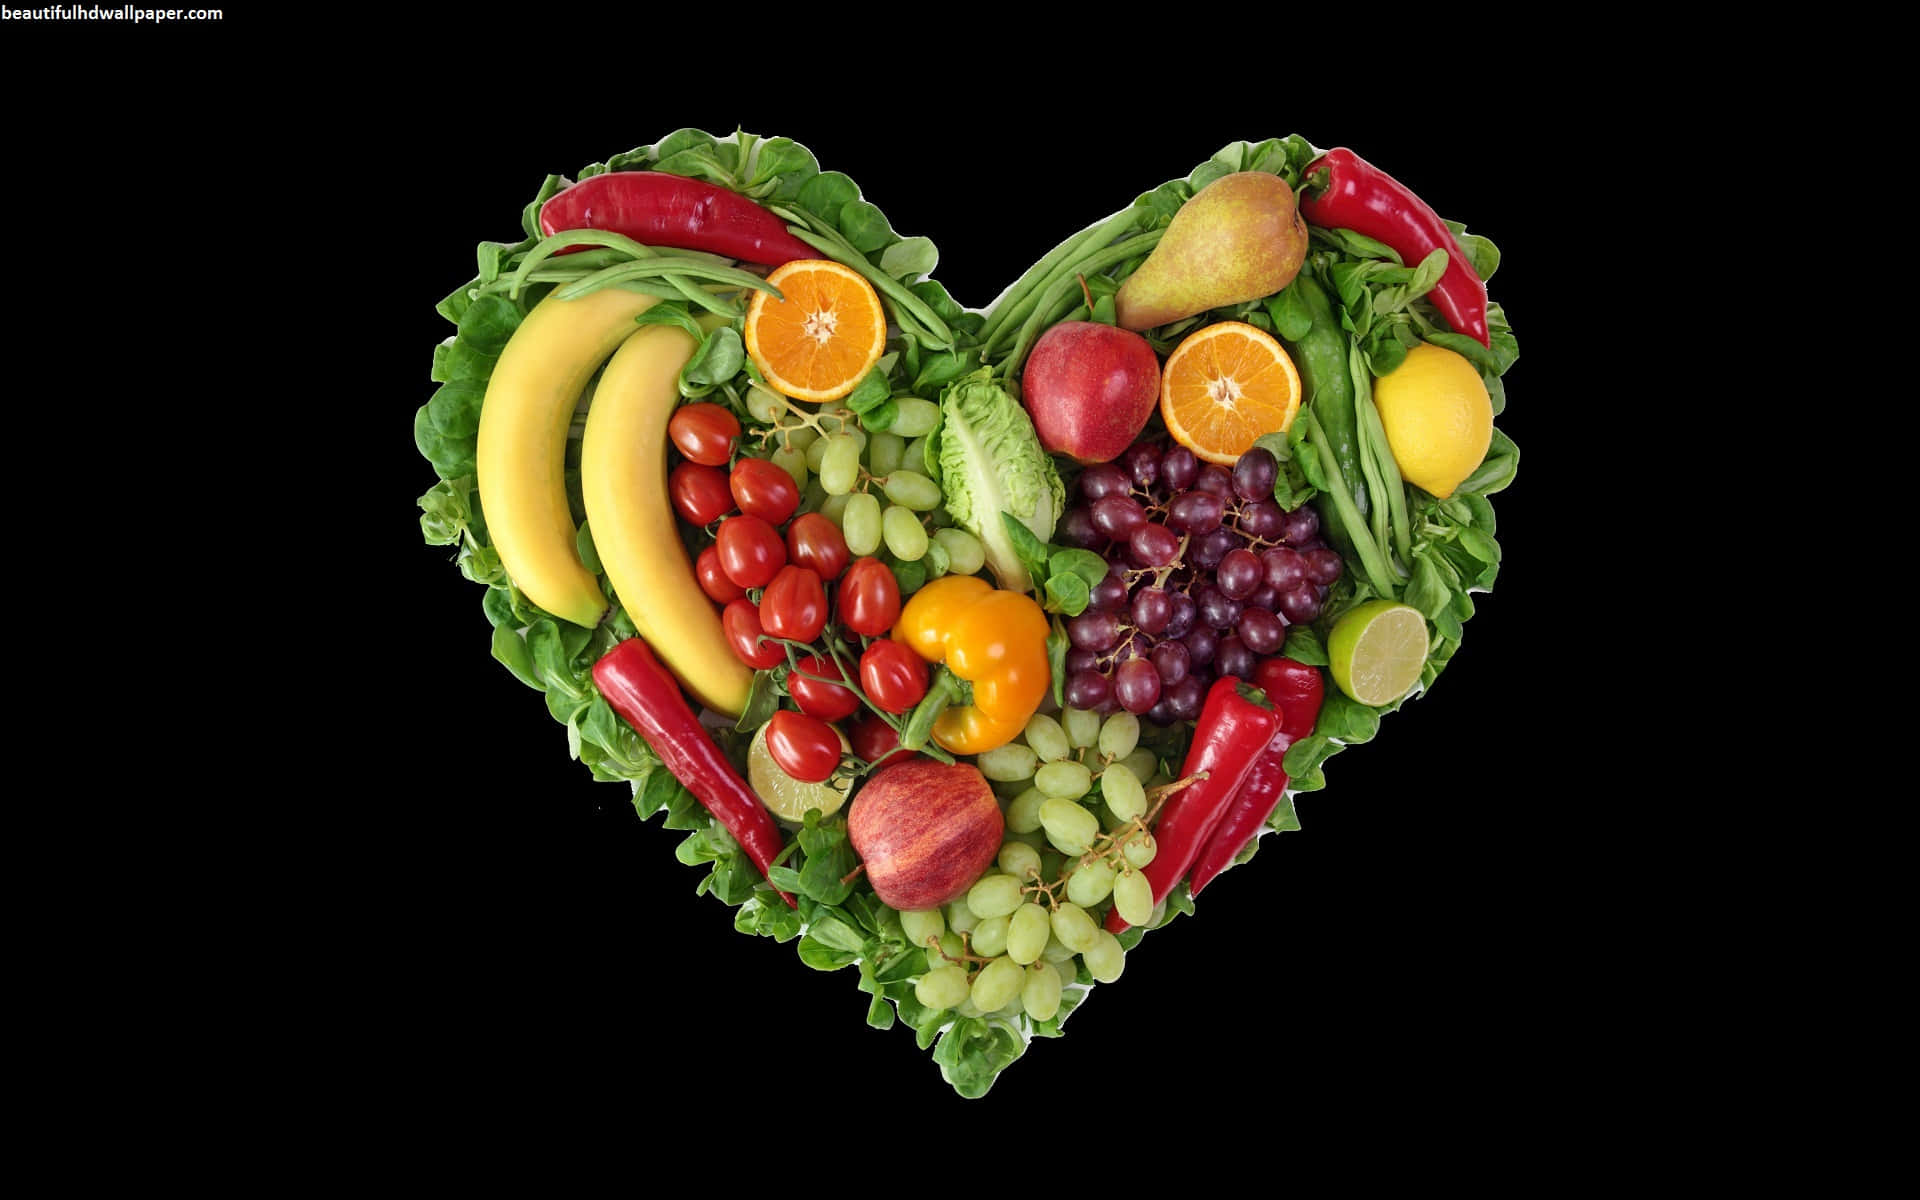 Heart-shaped Collection Of Fruits And Vegetables Wallpaper